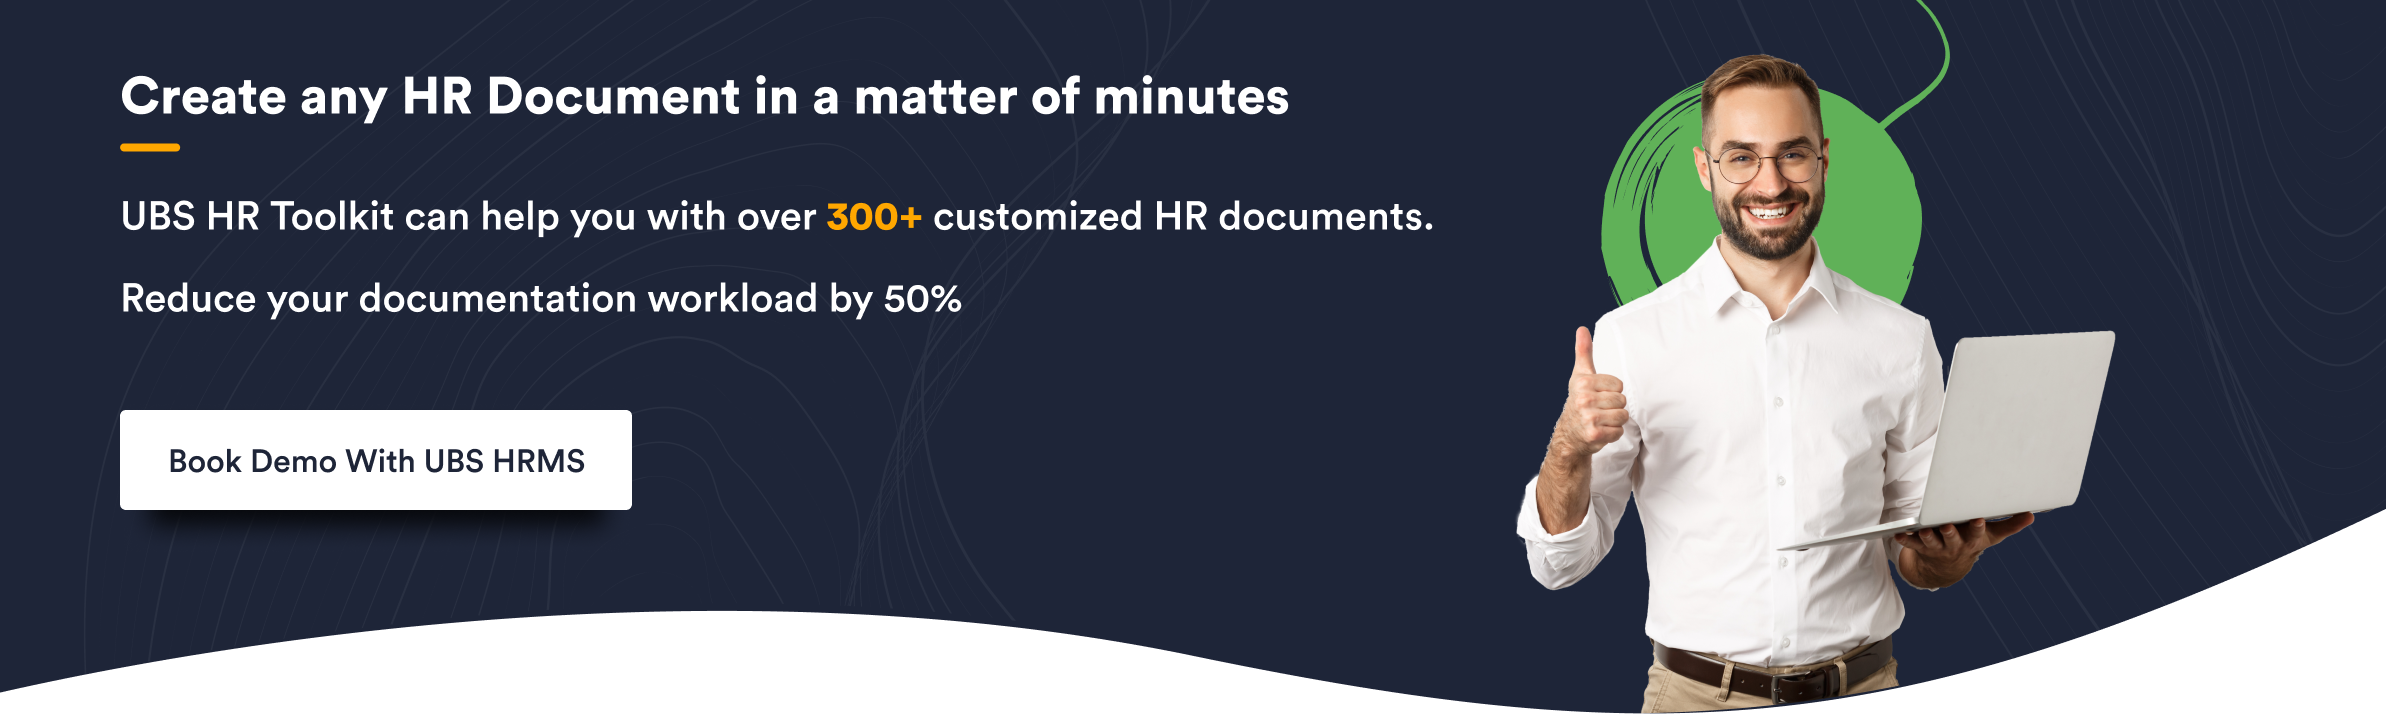 Create any HR Document in a matter of minutes